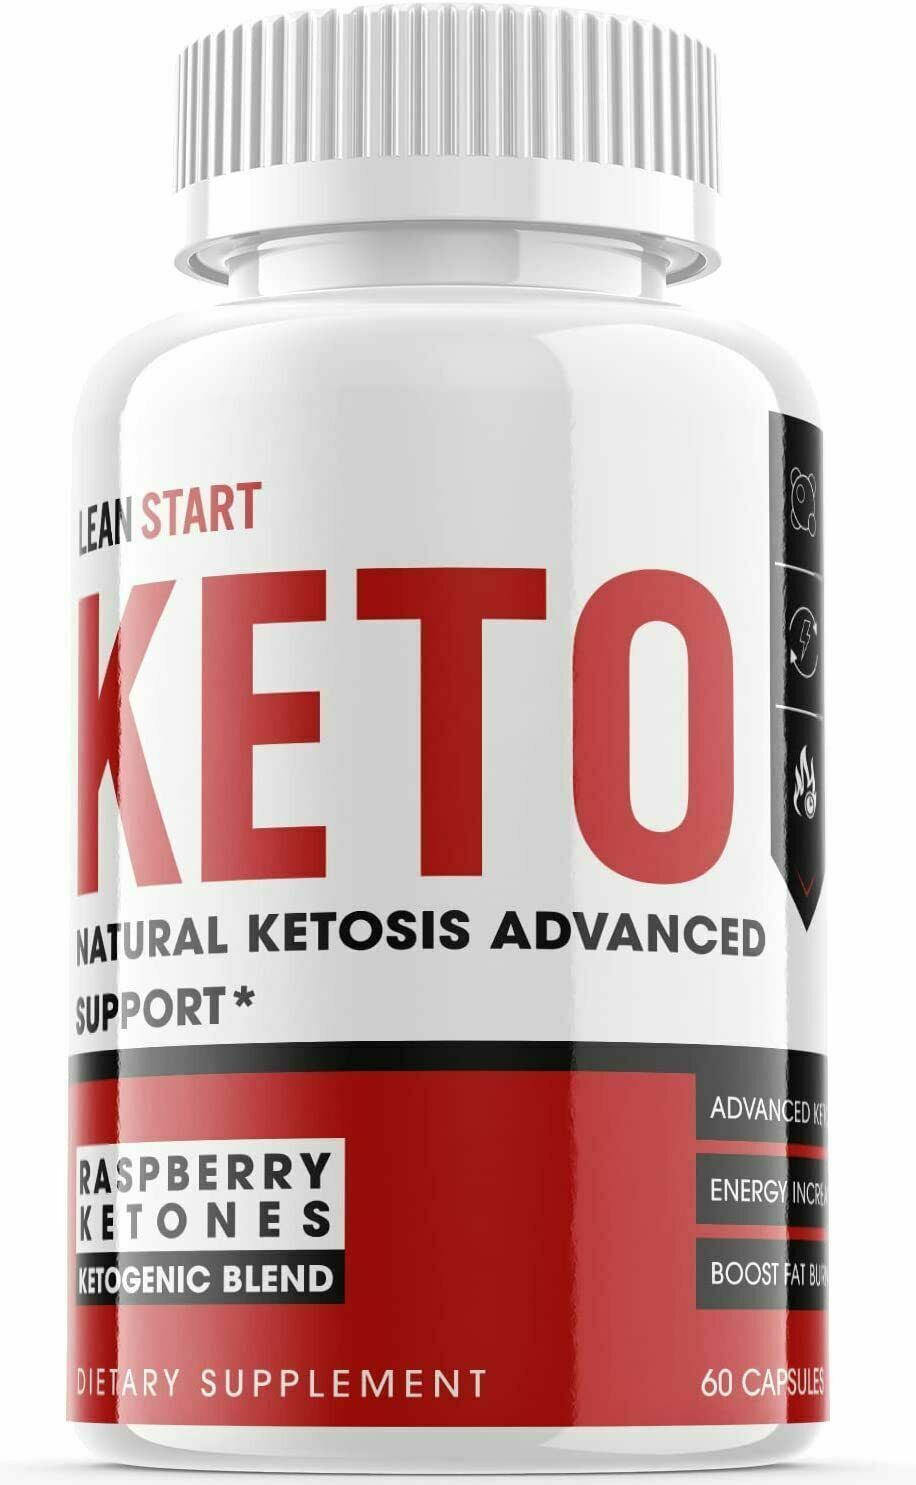 *Lean Start Keto, Ketogenic Weight Loss Support, 60 Caps, Free Shipping